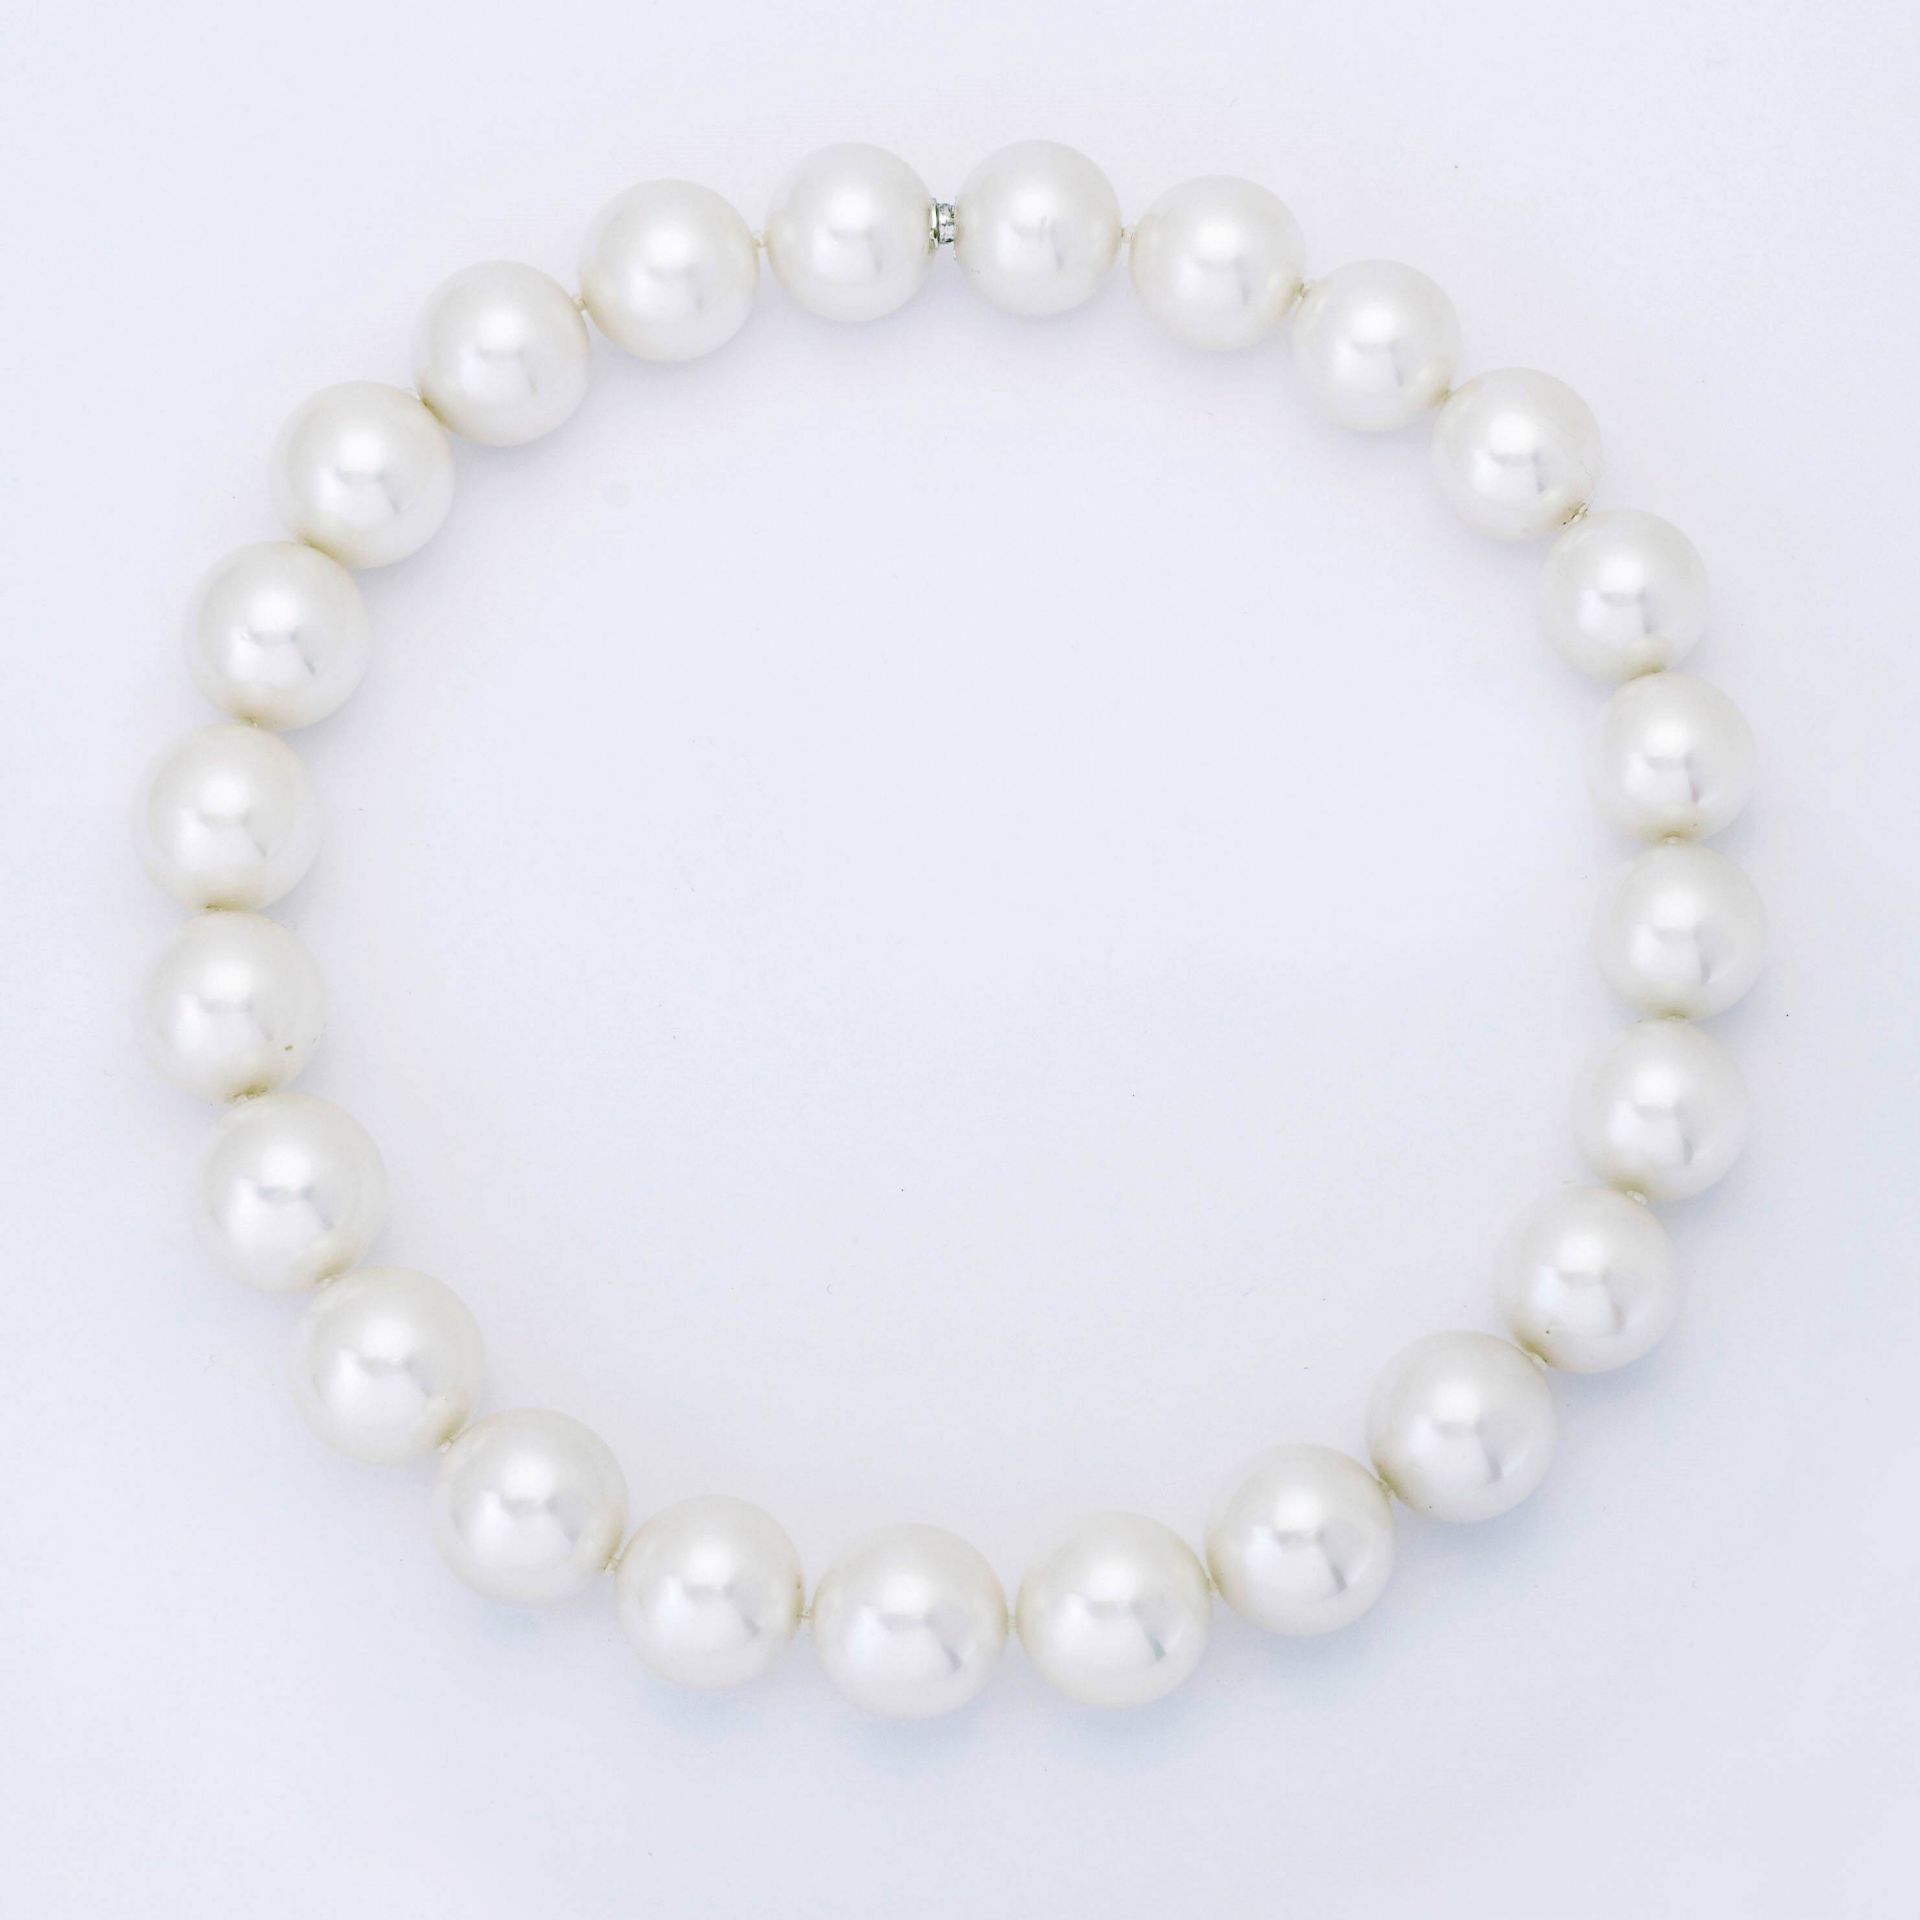 PEARL NECKLACE. - Image 2 of 2